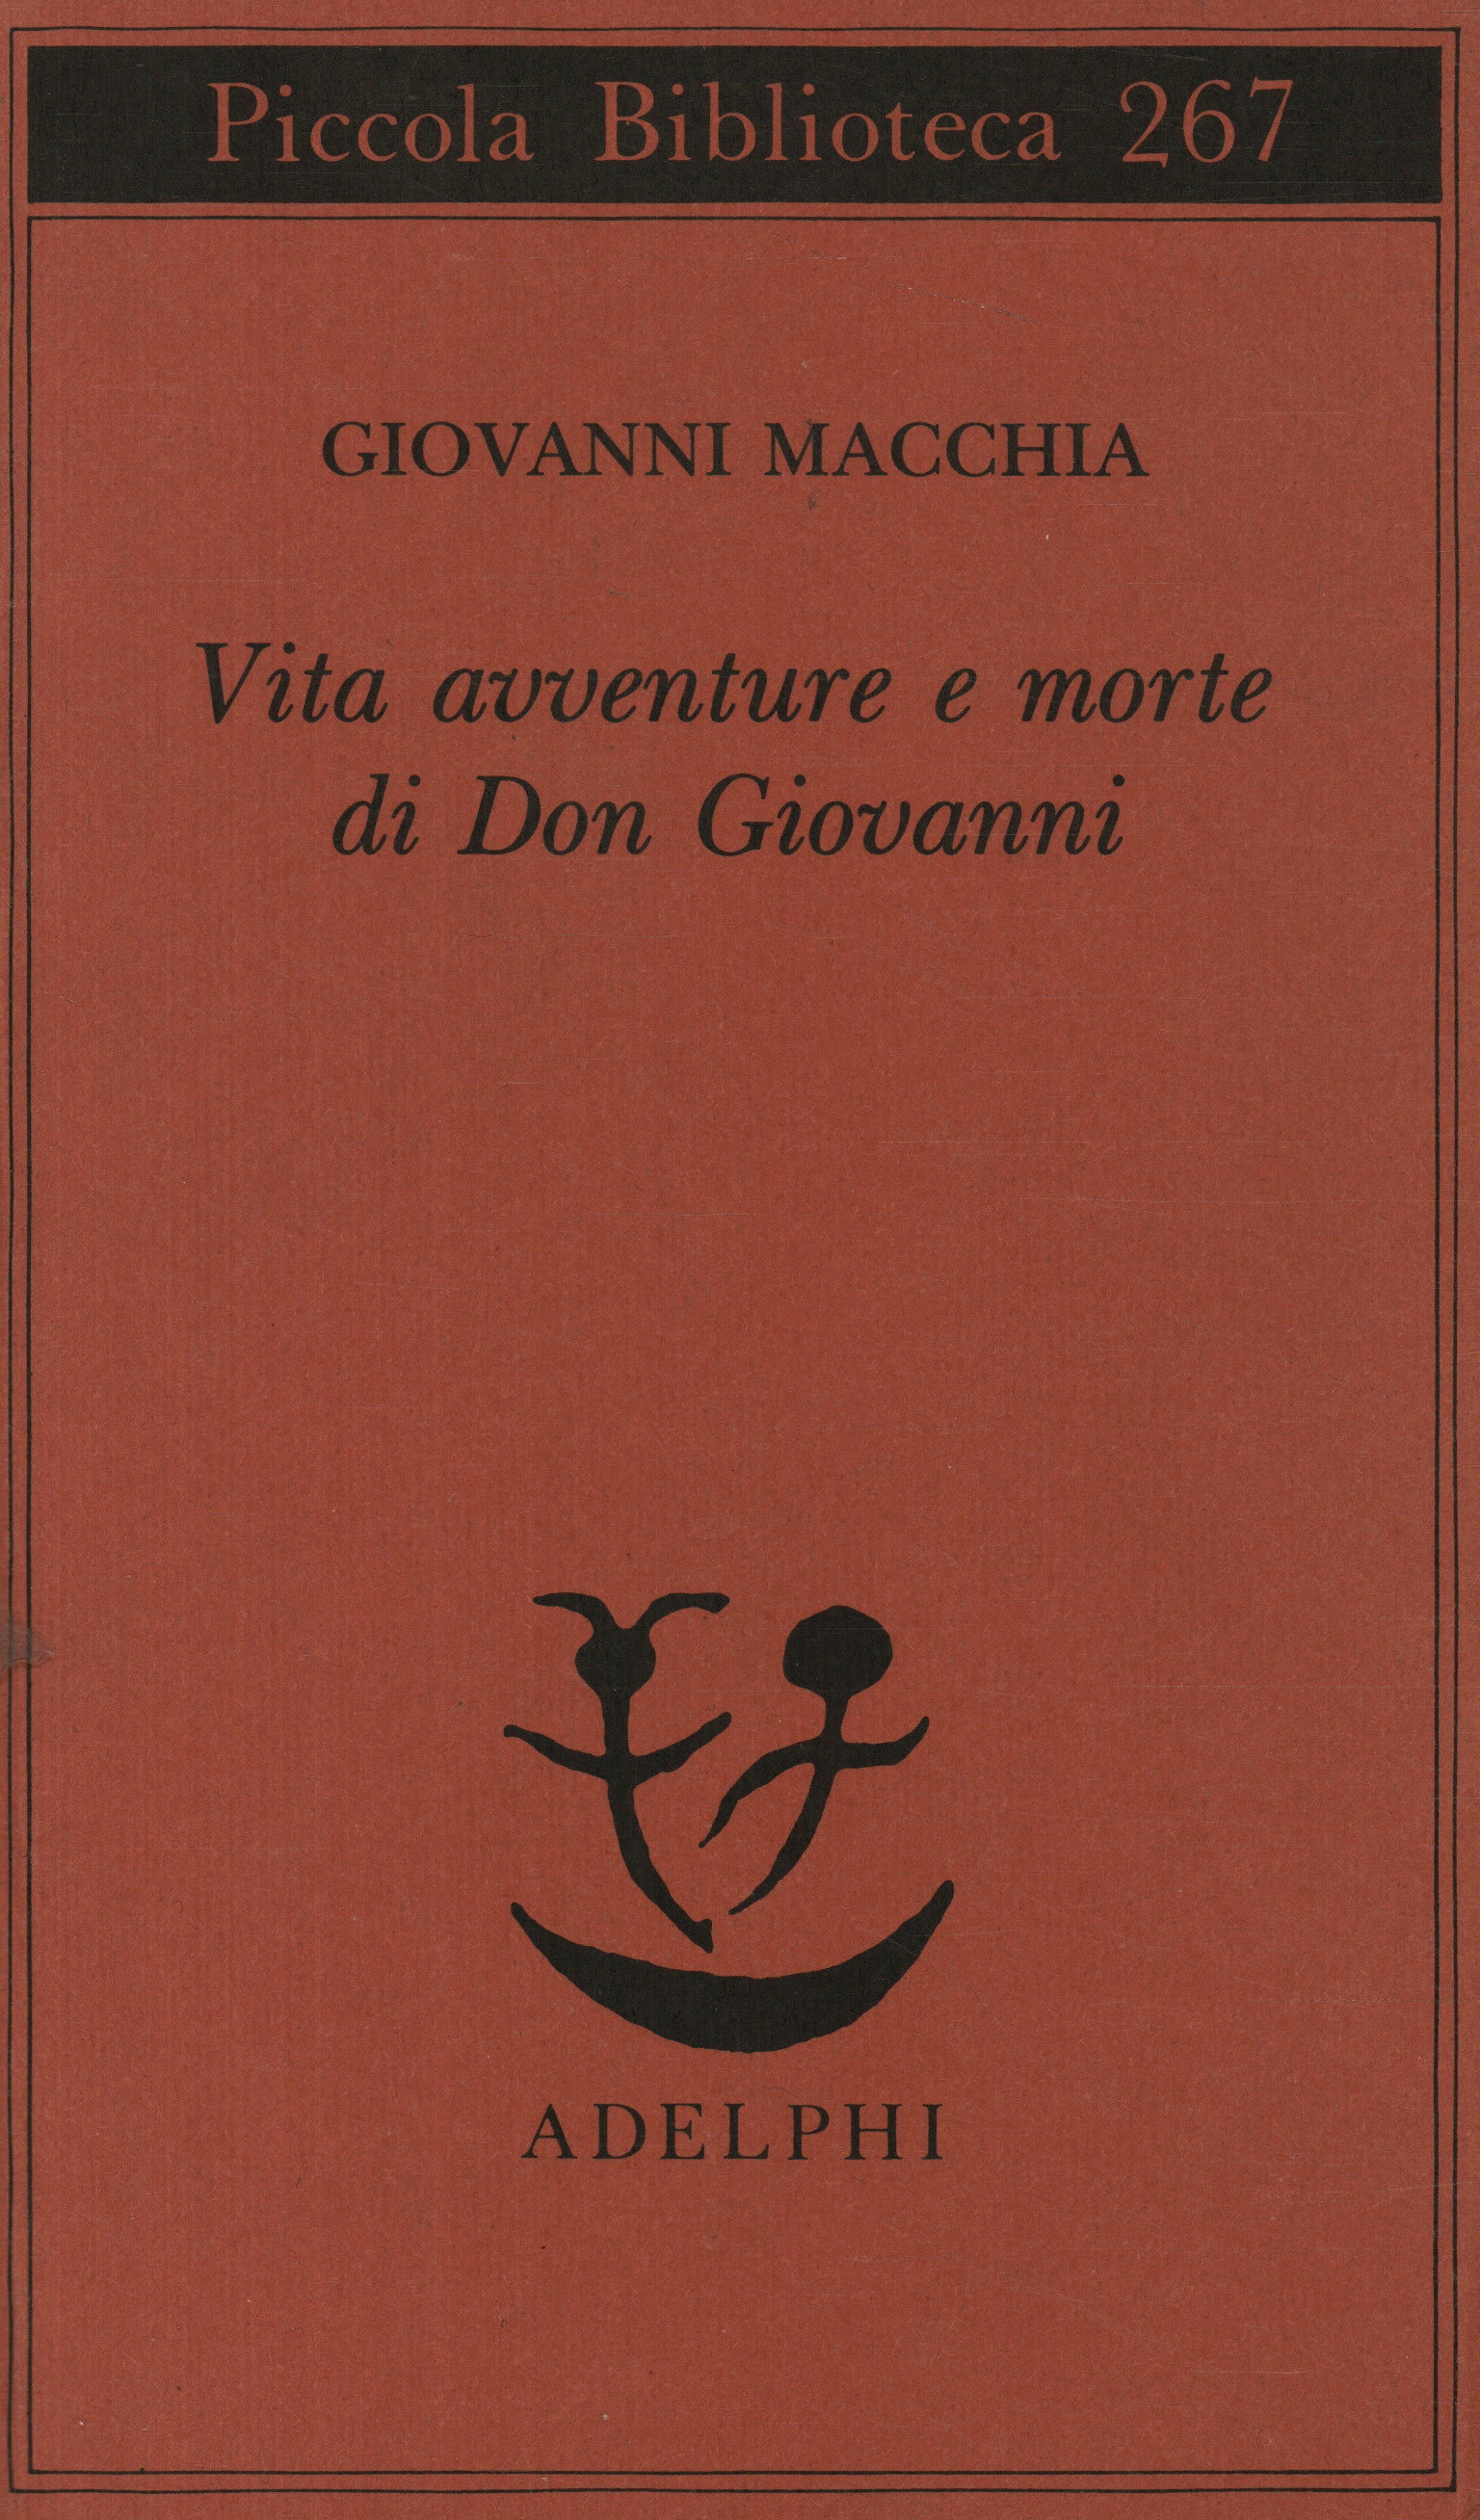 Life, Adventures and Death of Don Giovanni